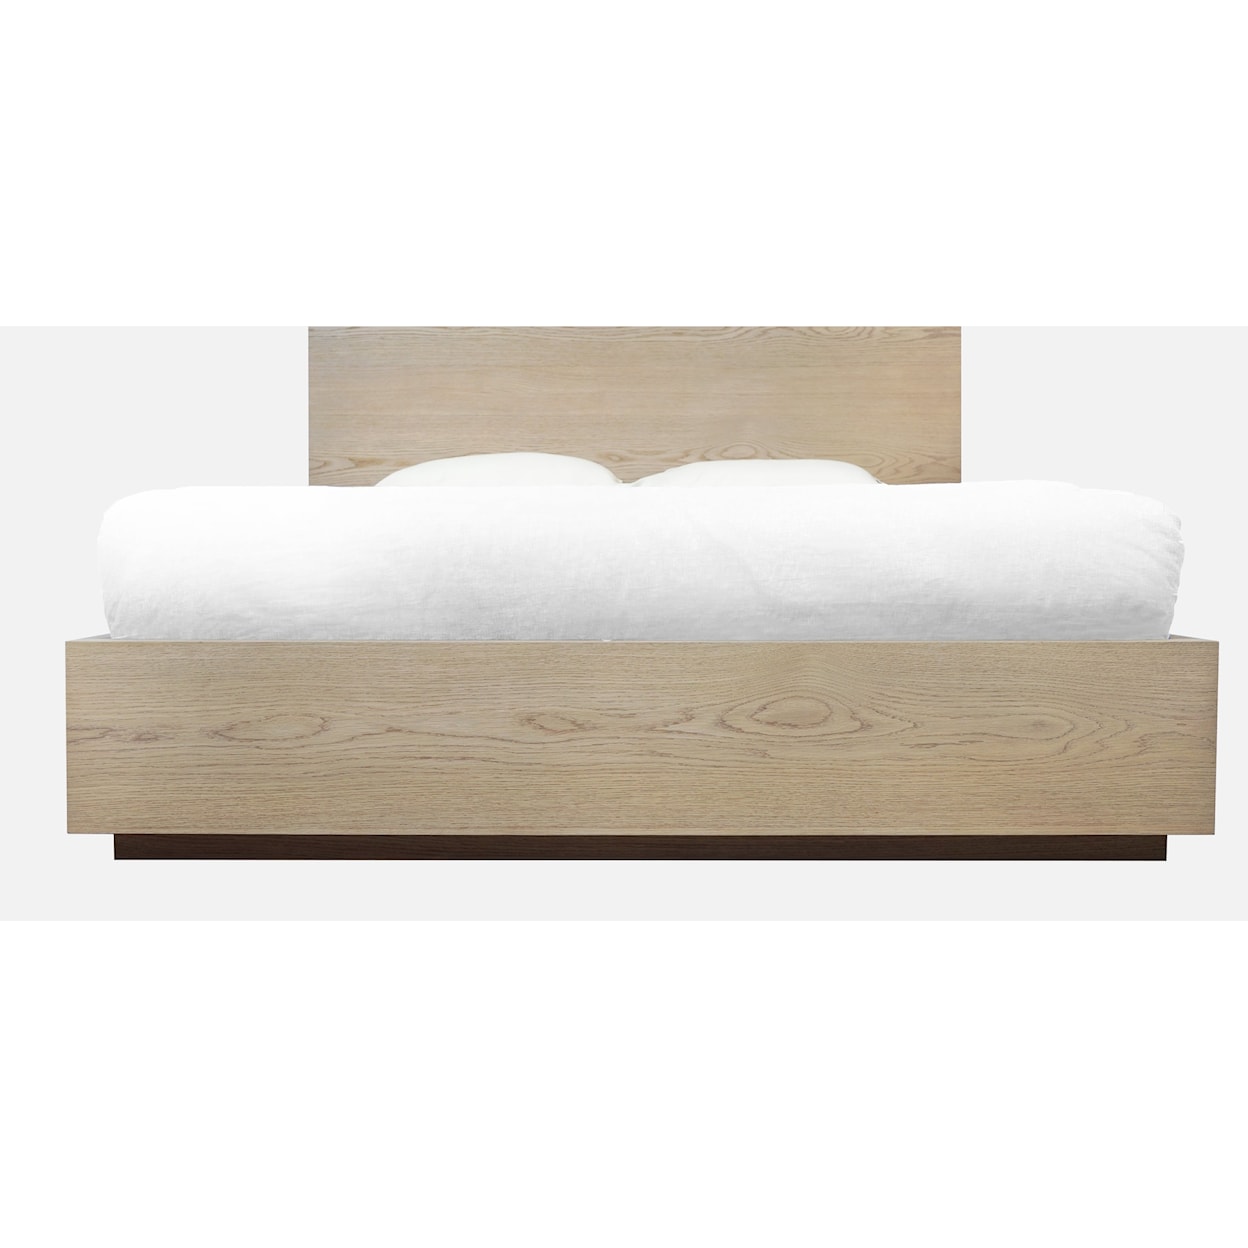 Modus International One Wood Panel Full Bed - Bisque